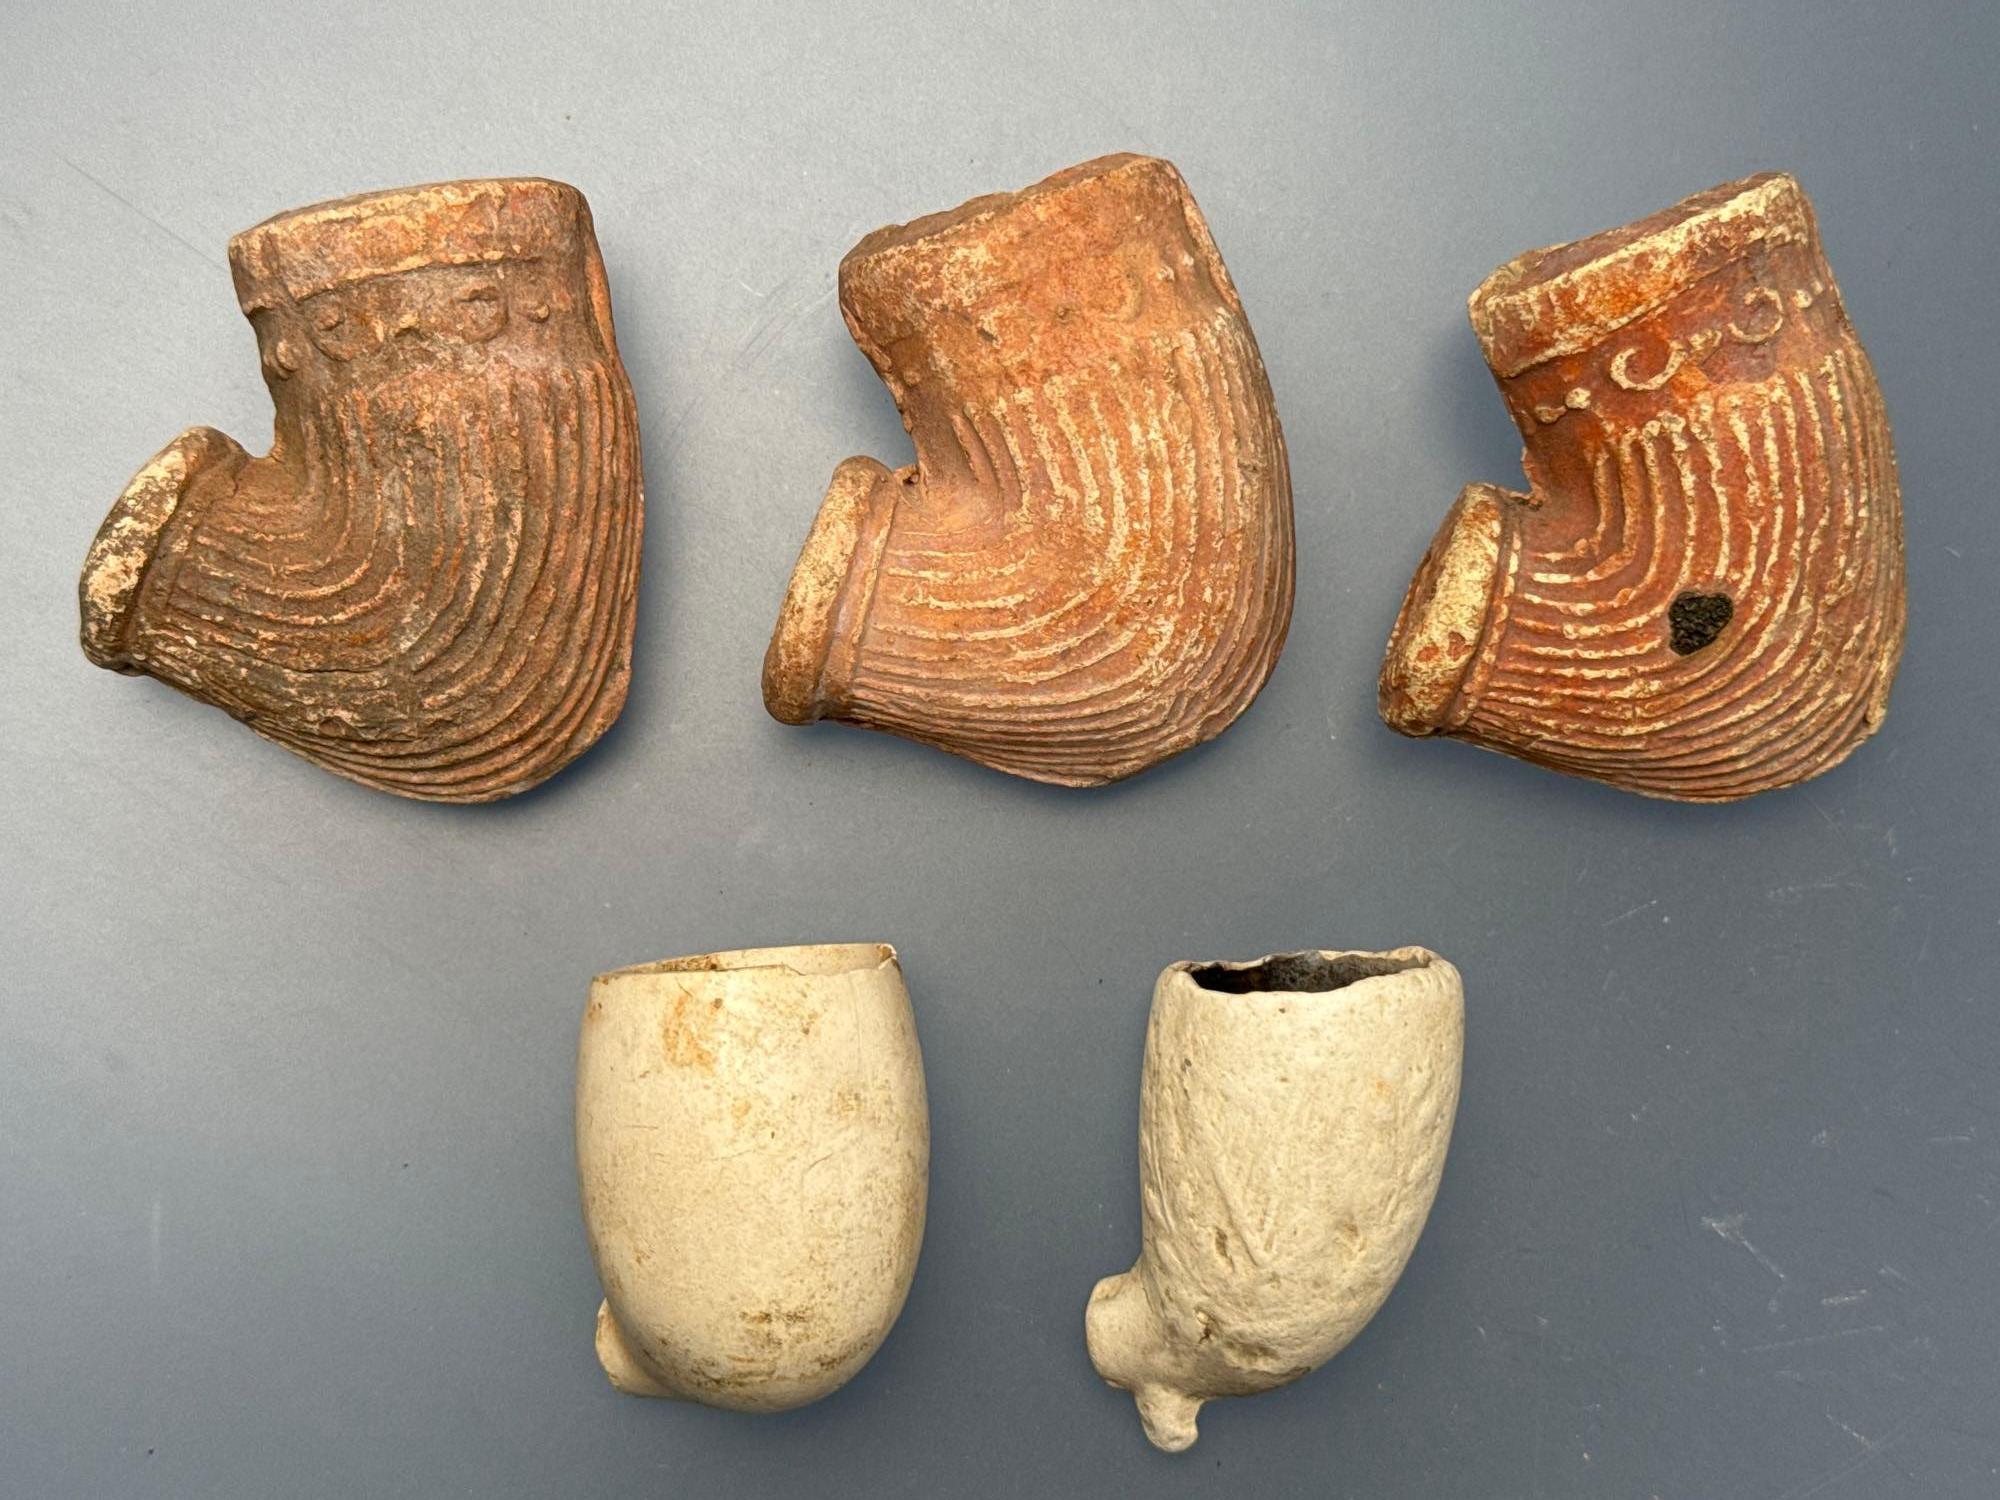 1800's Tavern and Kaolin Pipes, Collected by M. Bickecki in Newton, Bucks Co., PA